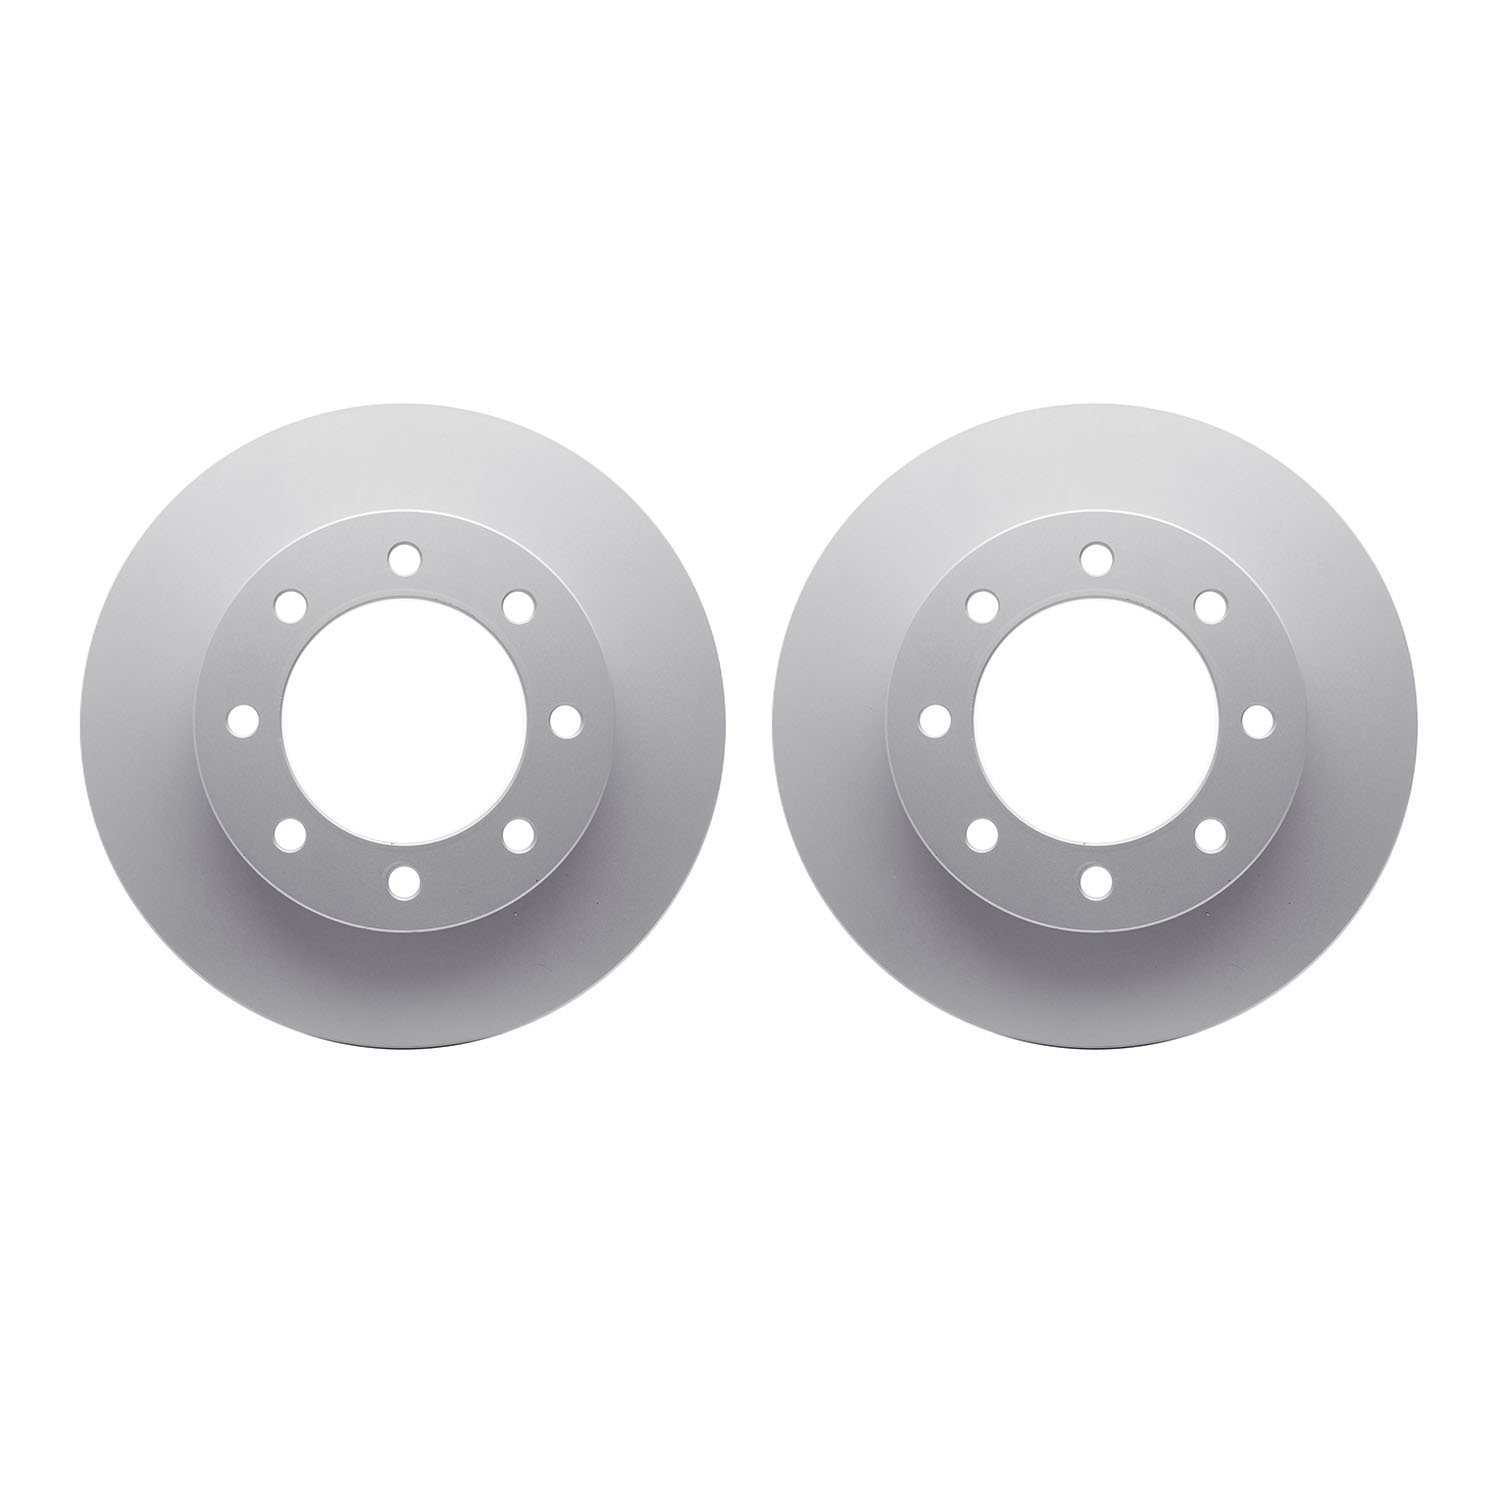 4002-54139 Geospec Brake Rotors, Fits Select Ford/Lincoln/Mercury/Mazda, Position: Front